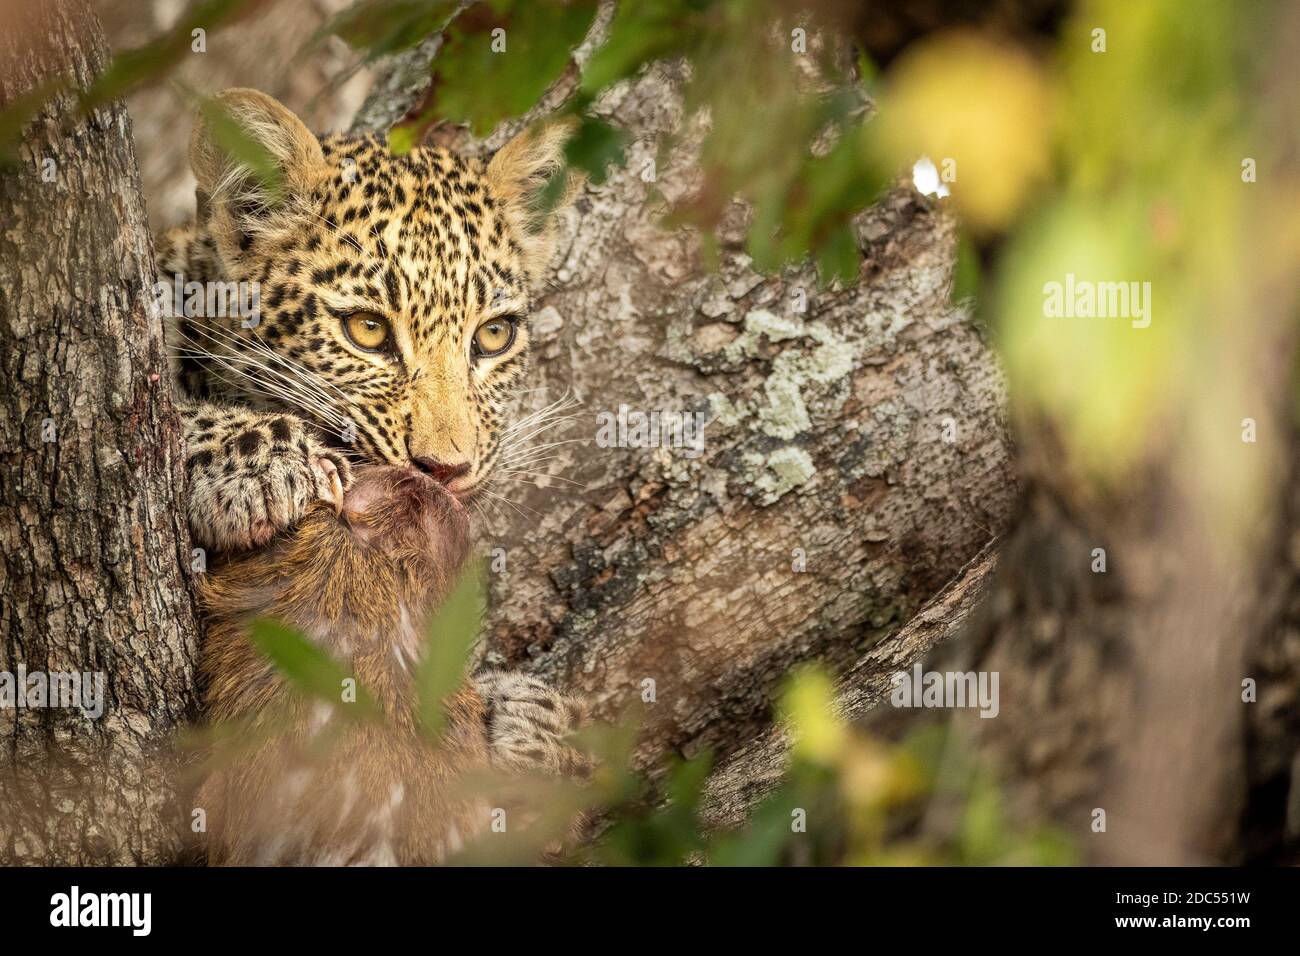 Baby leopard cub sitting in the tree holding prey in Kruger Park in South Africa Stock Photo